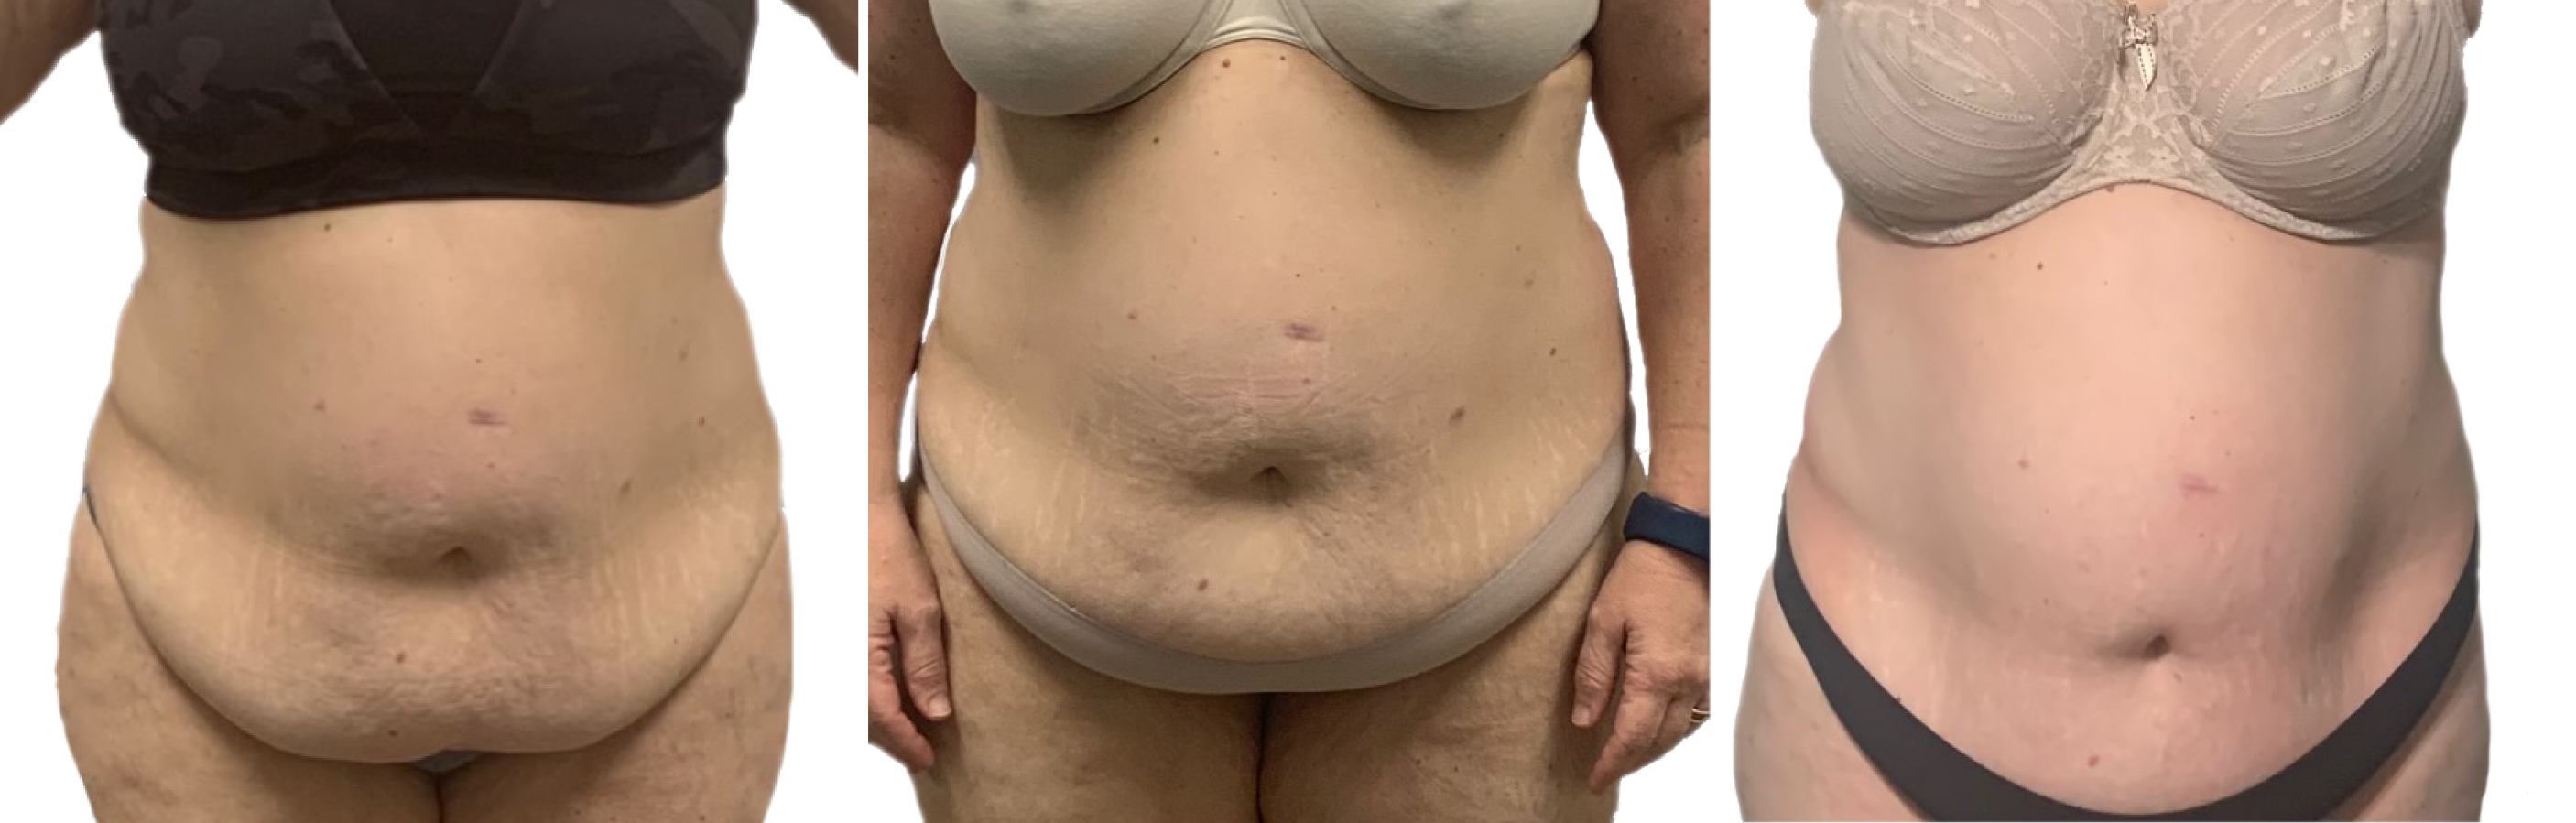 Dramatic fat and loose skin reduction